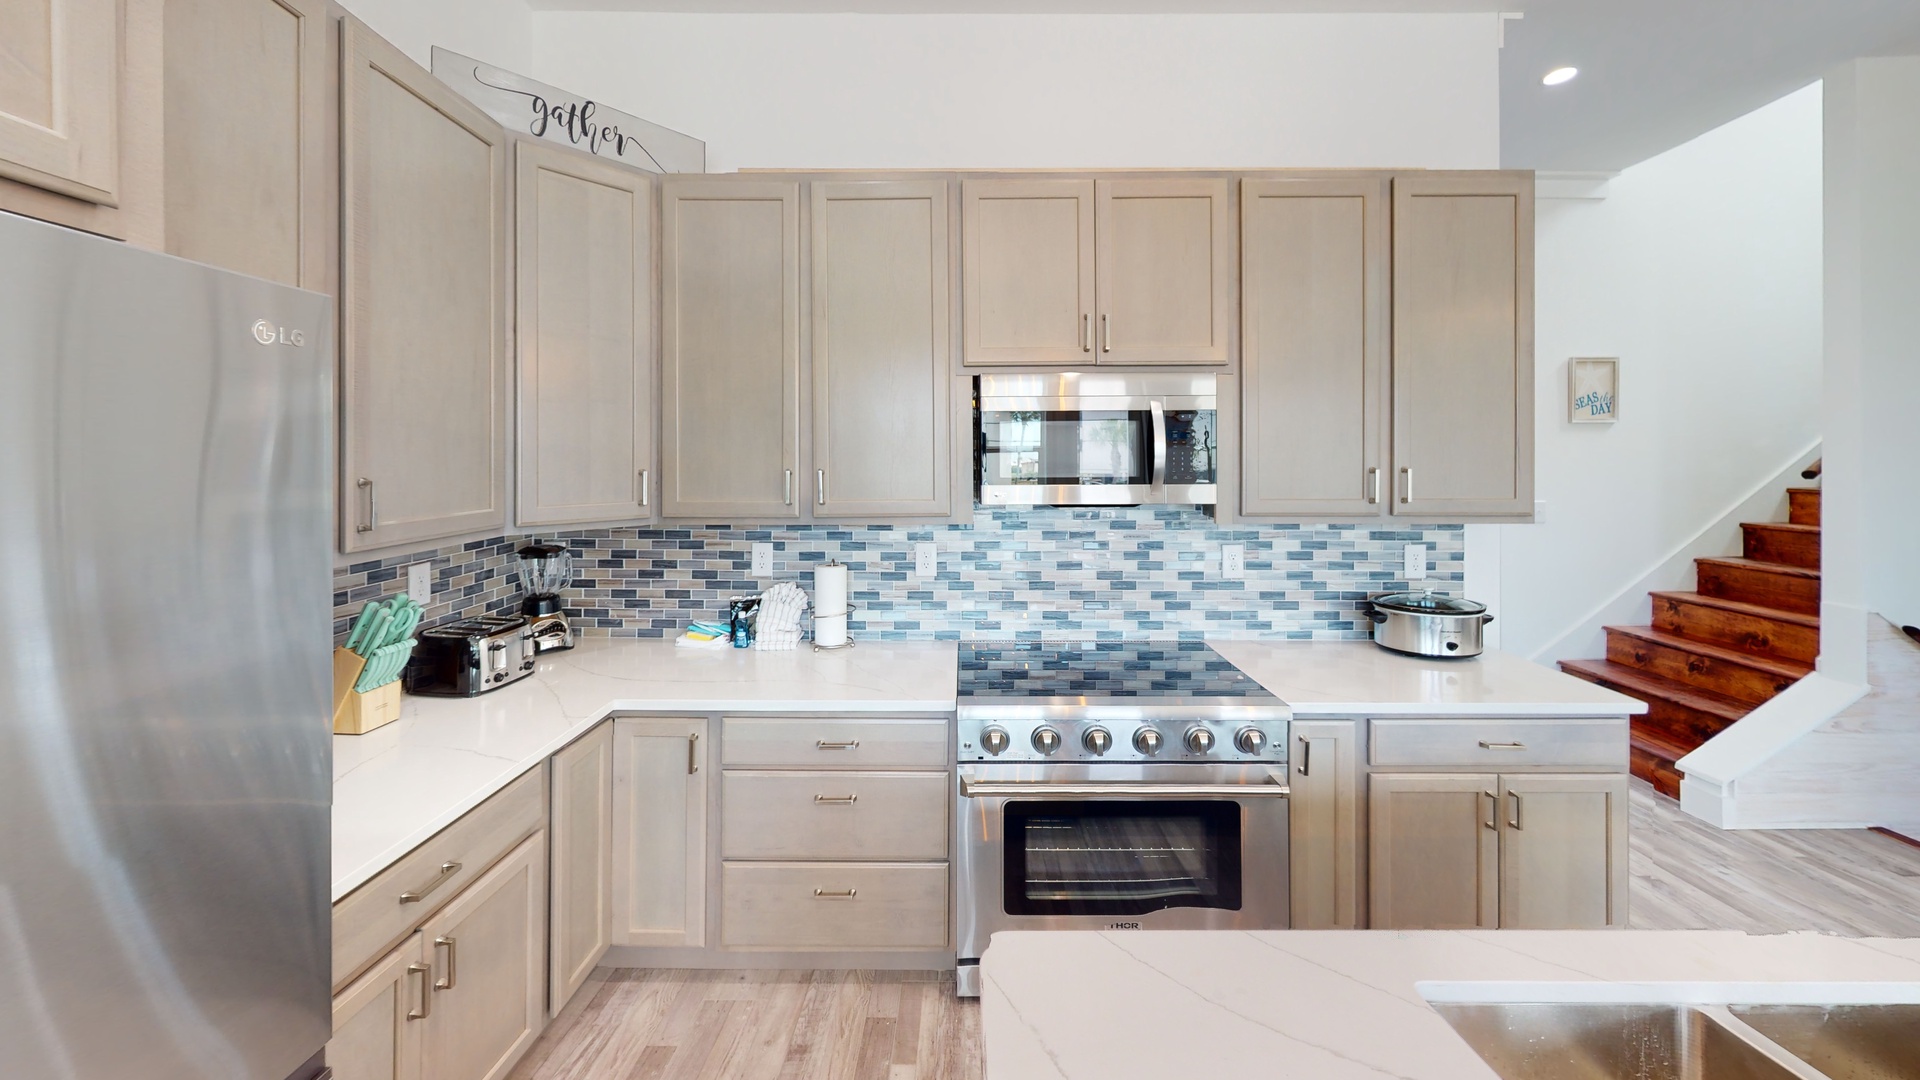 Fully equipped kitchen and stainless appliances